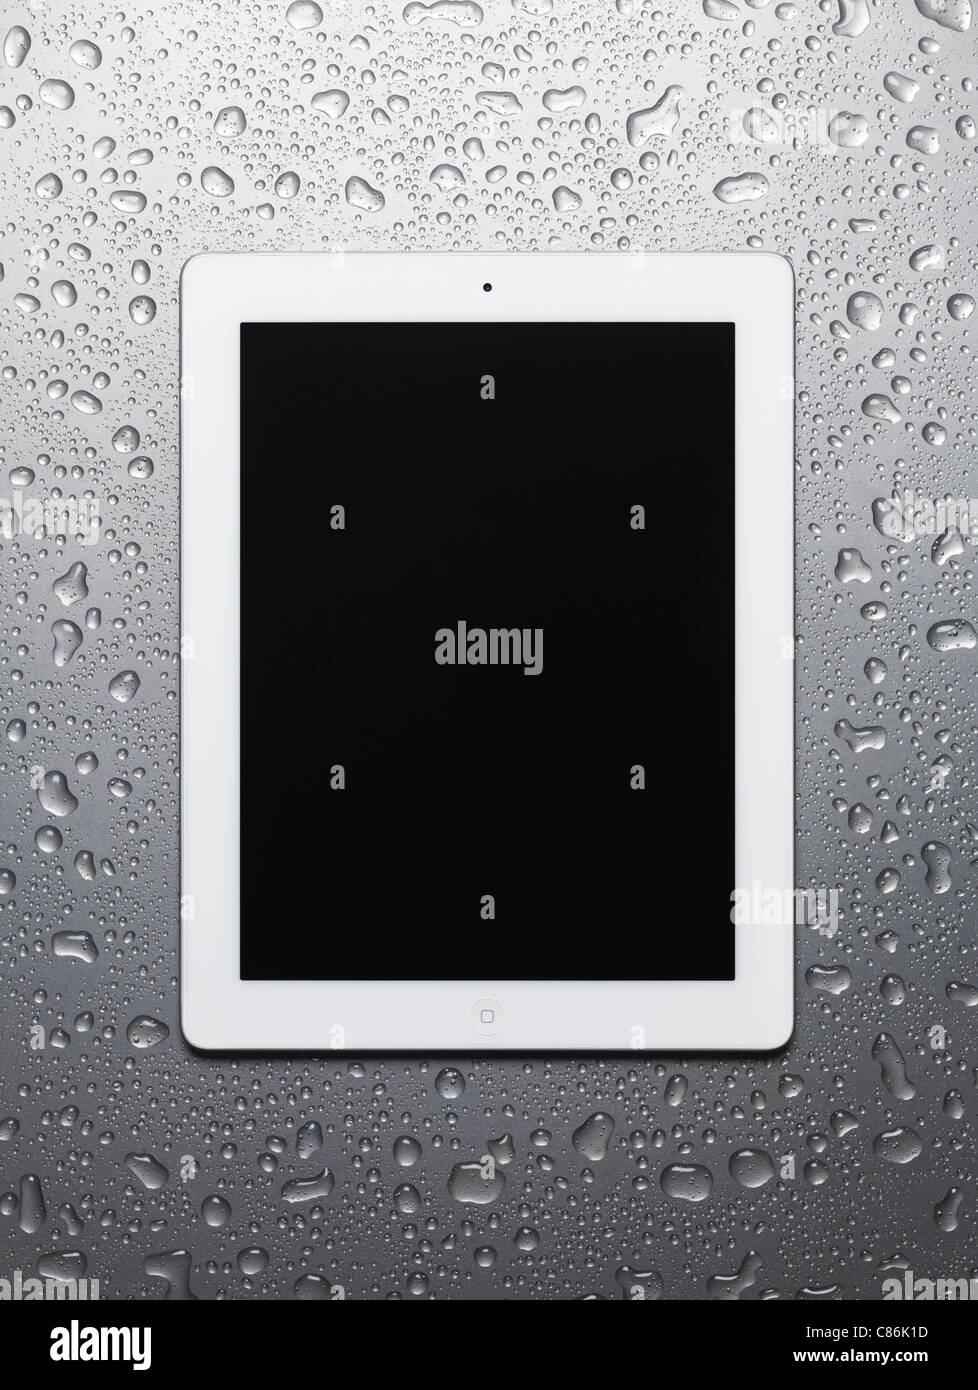 White Apple iPad 2 tablet computer with blank screen on wet gray steel background Stock Photo